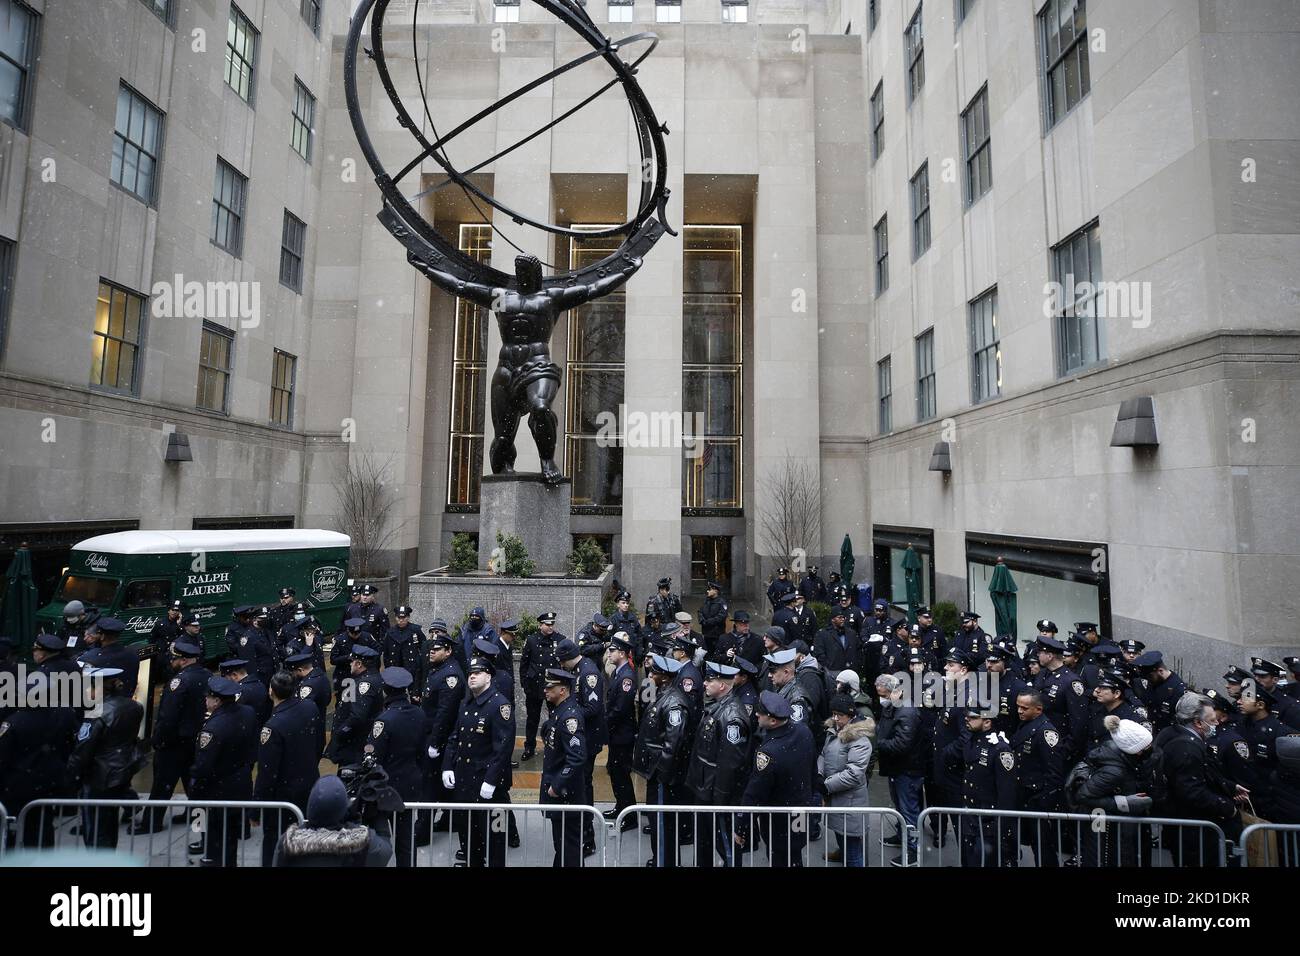 Thousands of police officers from various jurisdictions around the country attend the funeral for the slain NYPD officer Jason Rivera on January 28, 2022 in New York city, USA. The young officer was killed less than a week ago while responding to a domestic disturbance in Harlem. His partner Wilbert Mora who was also shot during the incident, died days later and will be laid to rest next week. (Photo by John Lamparski/NurPhoto) Stock Photo